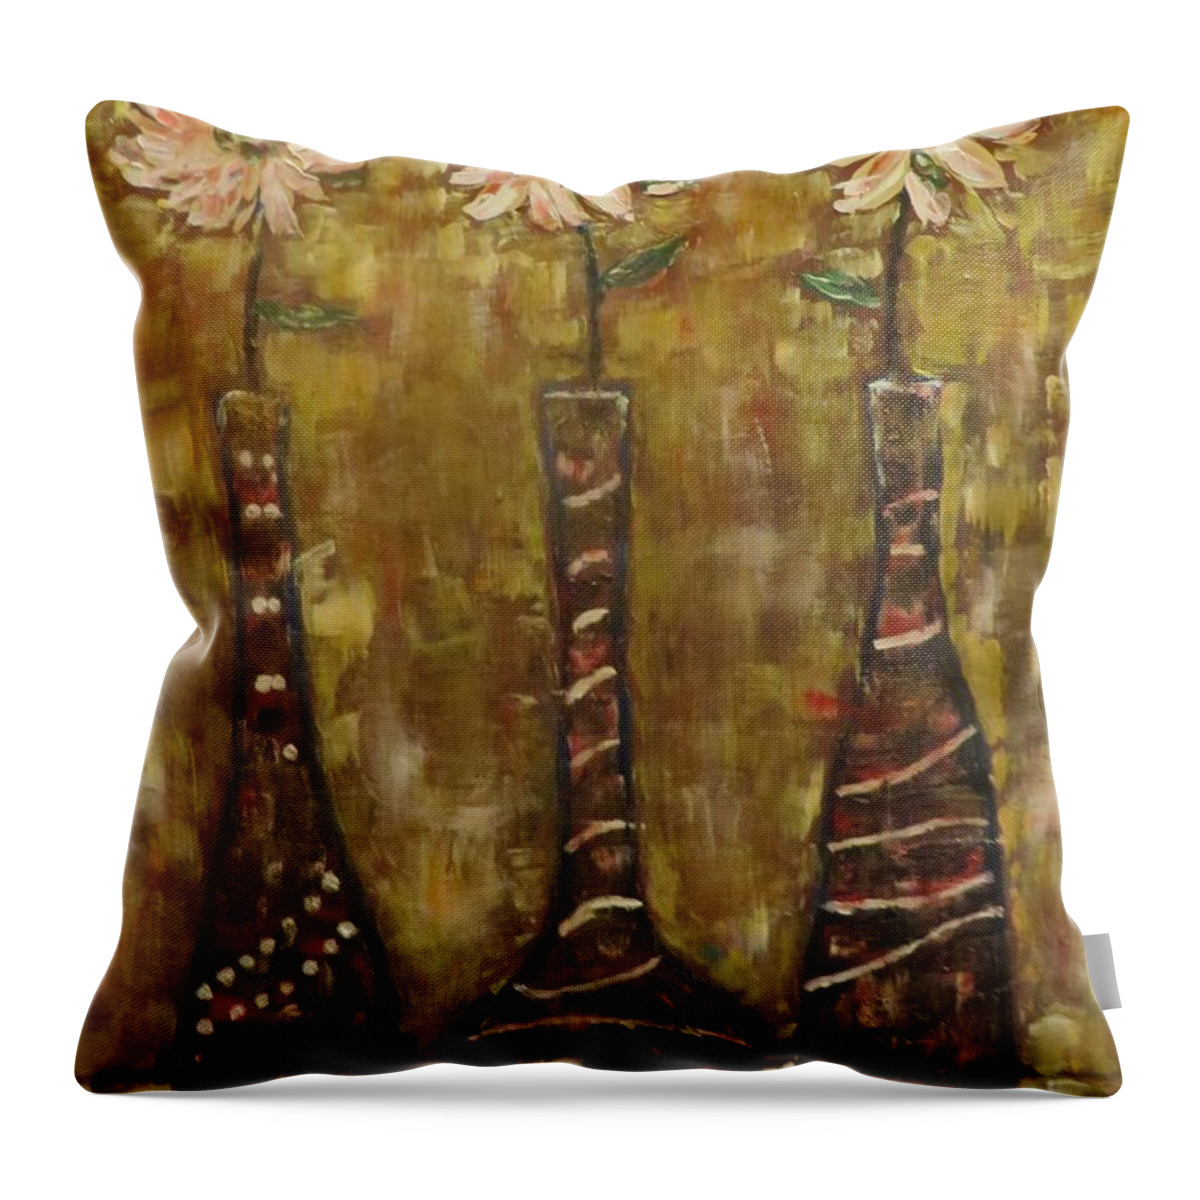 Oil On Canvas Throw Pillow featuring the painting Flowers in vases by Sam Shaker